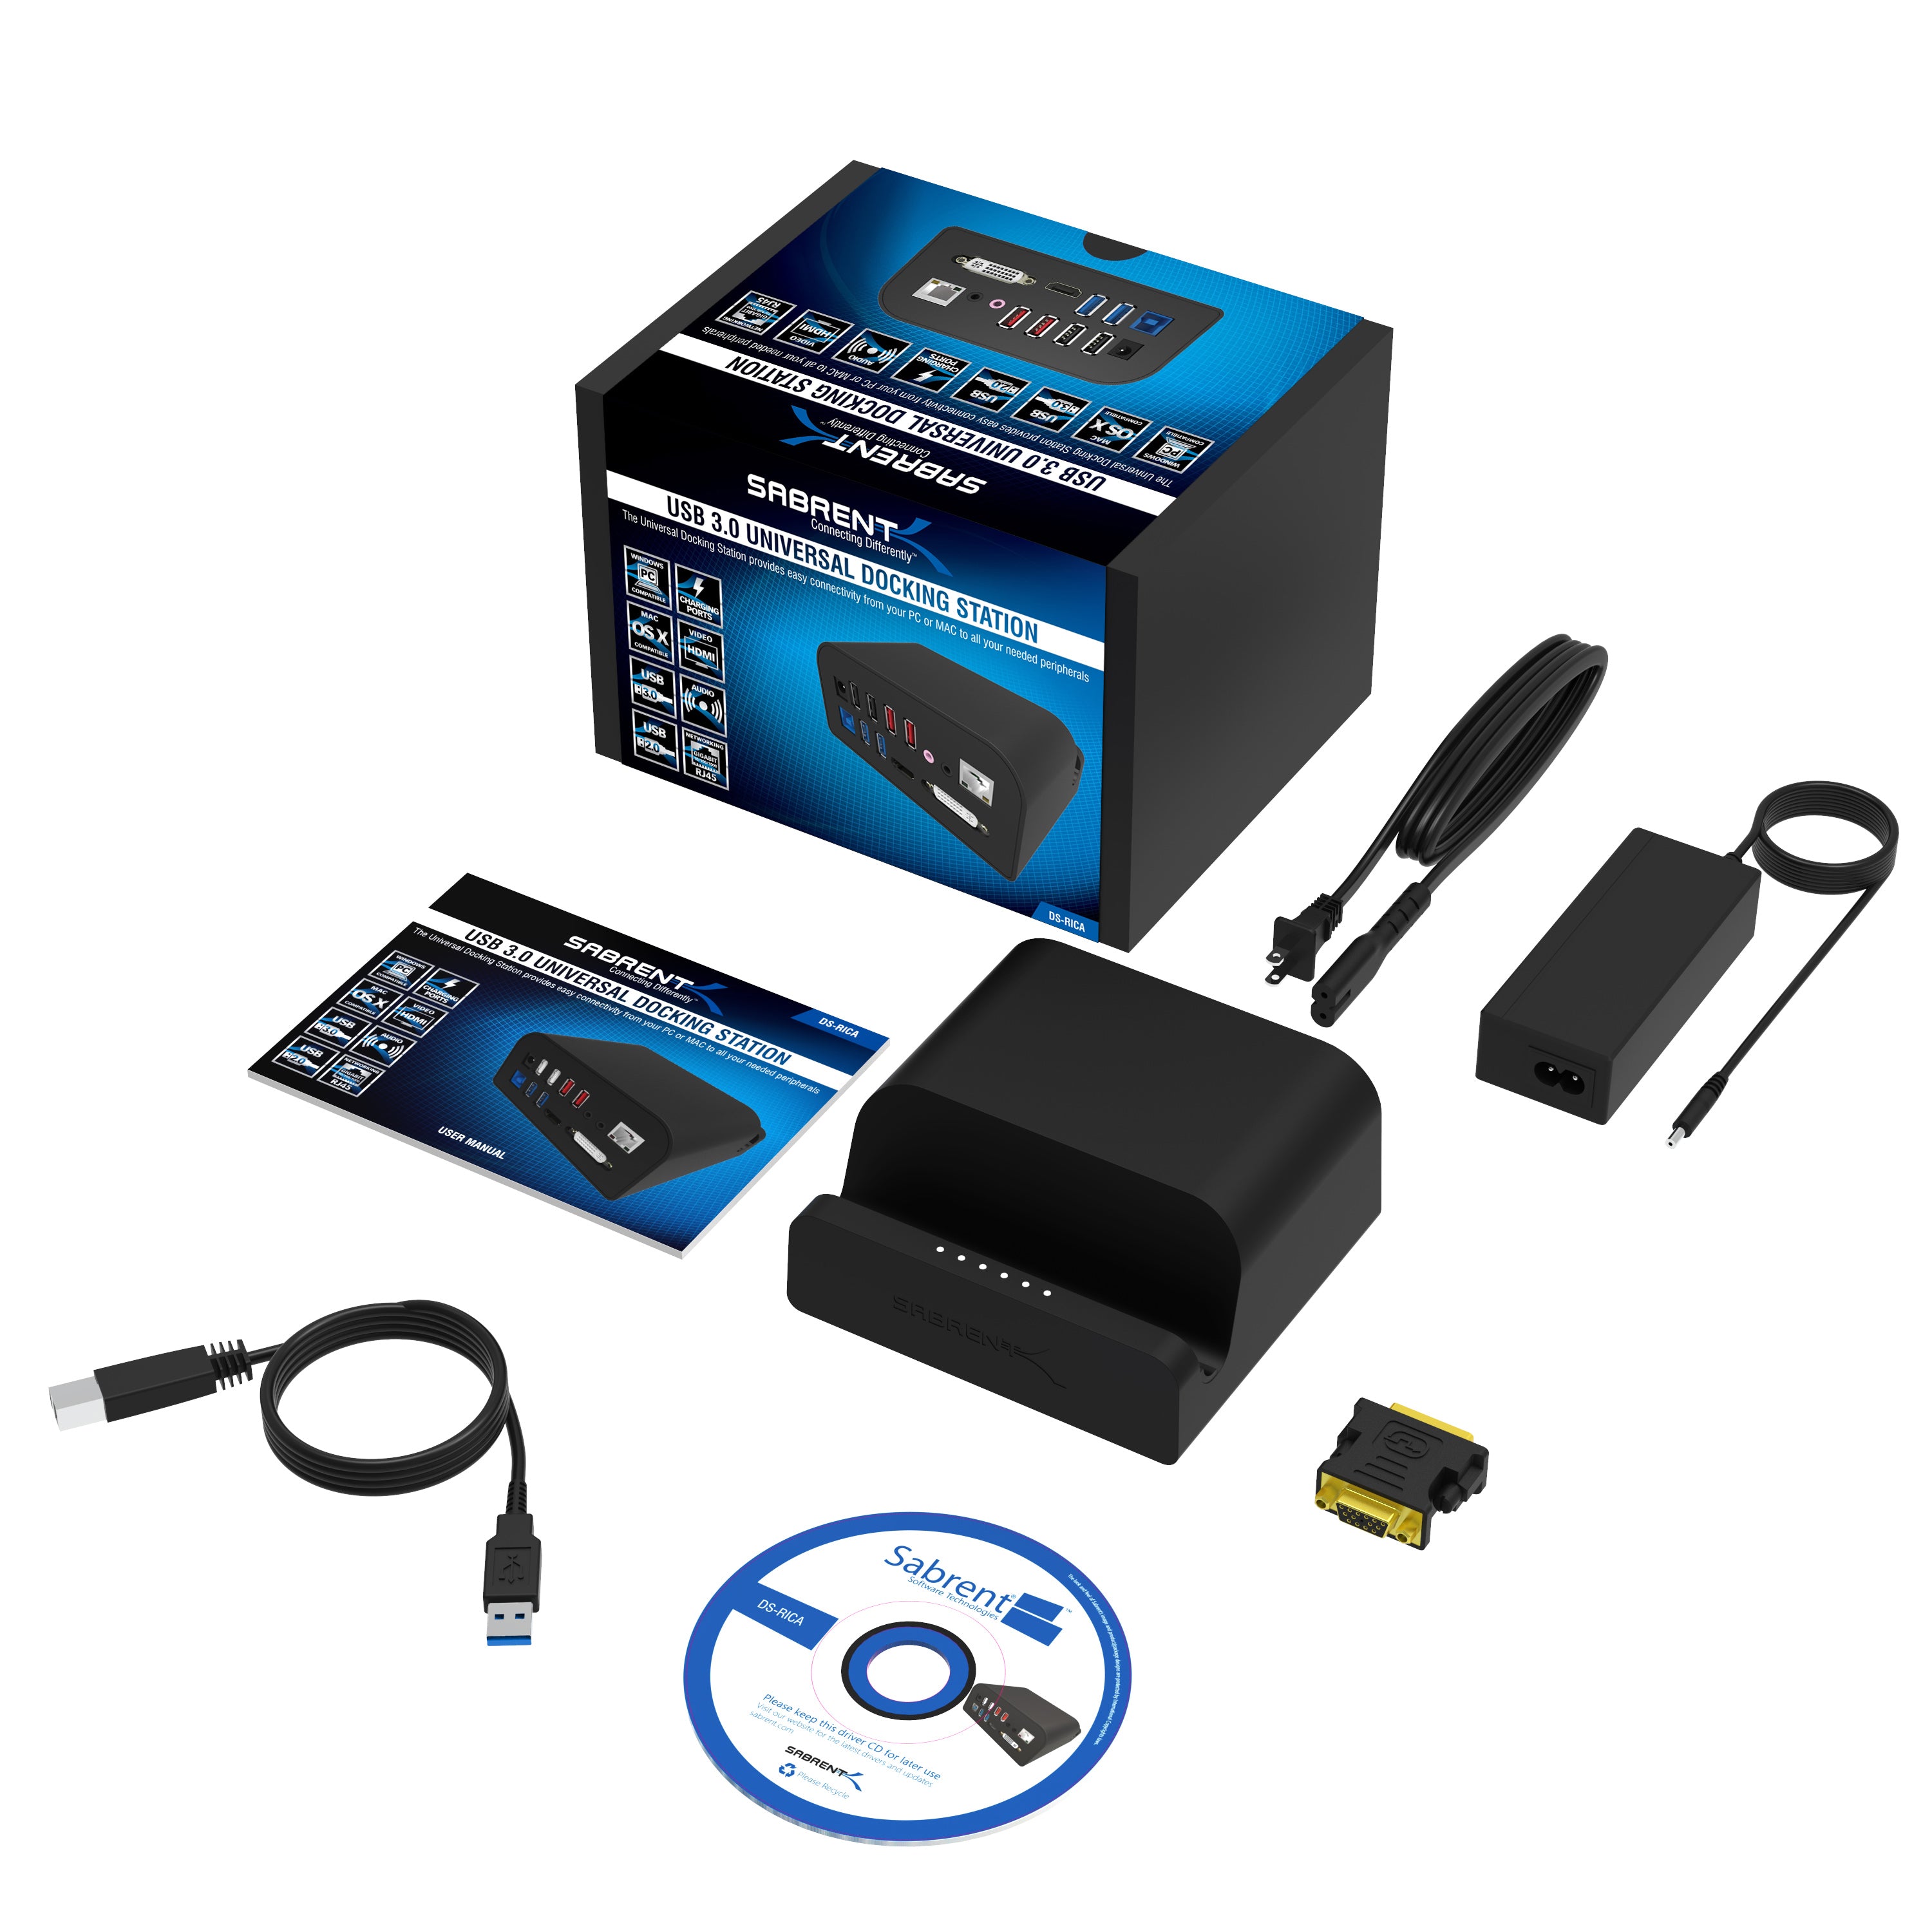 USB 3.0 Universal with for Tablets and Laptops - Sabrent